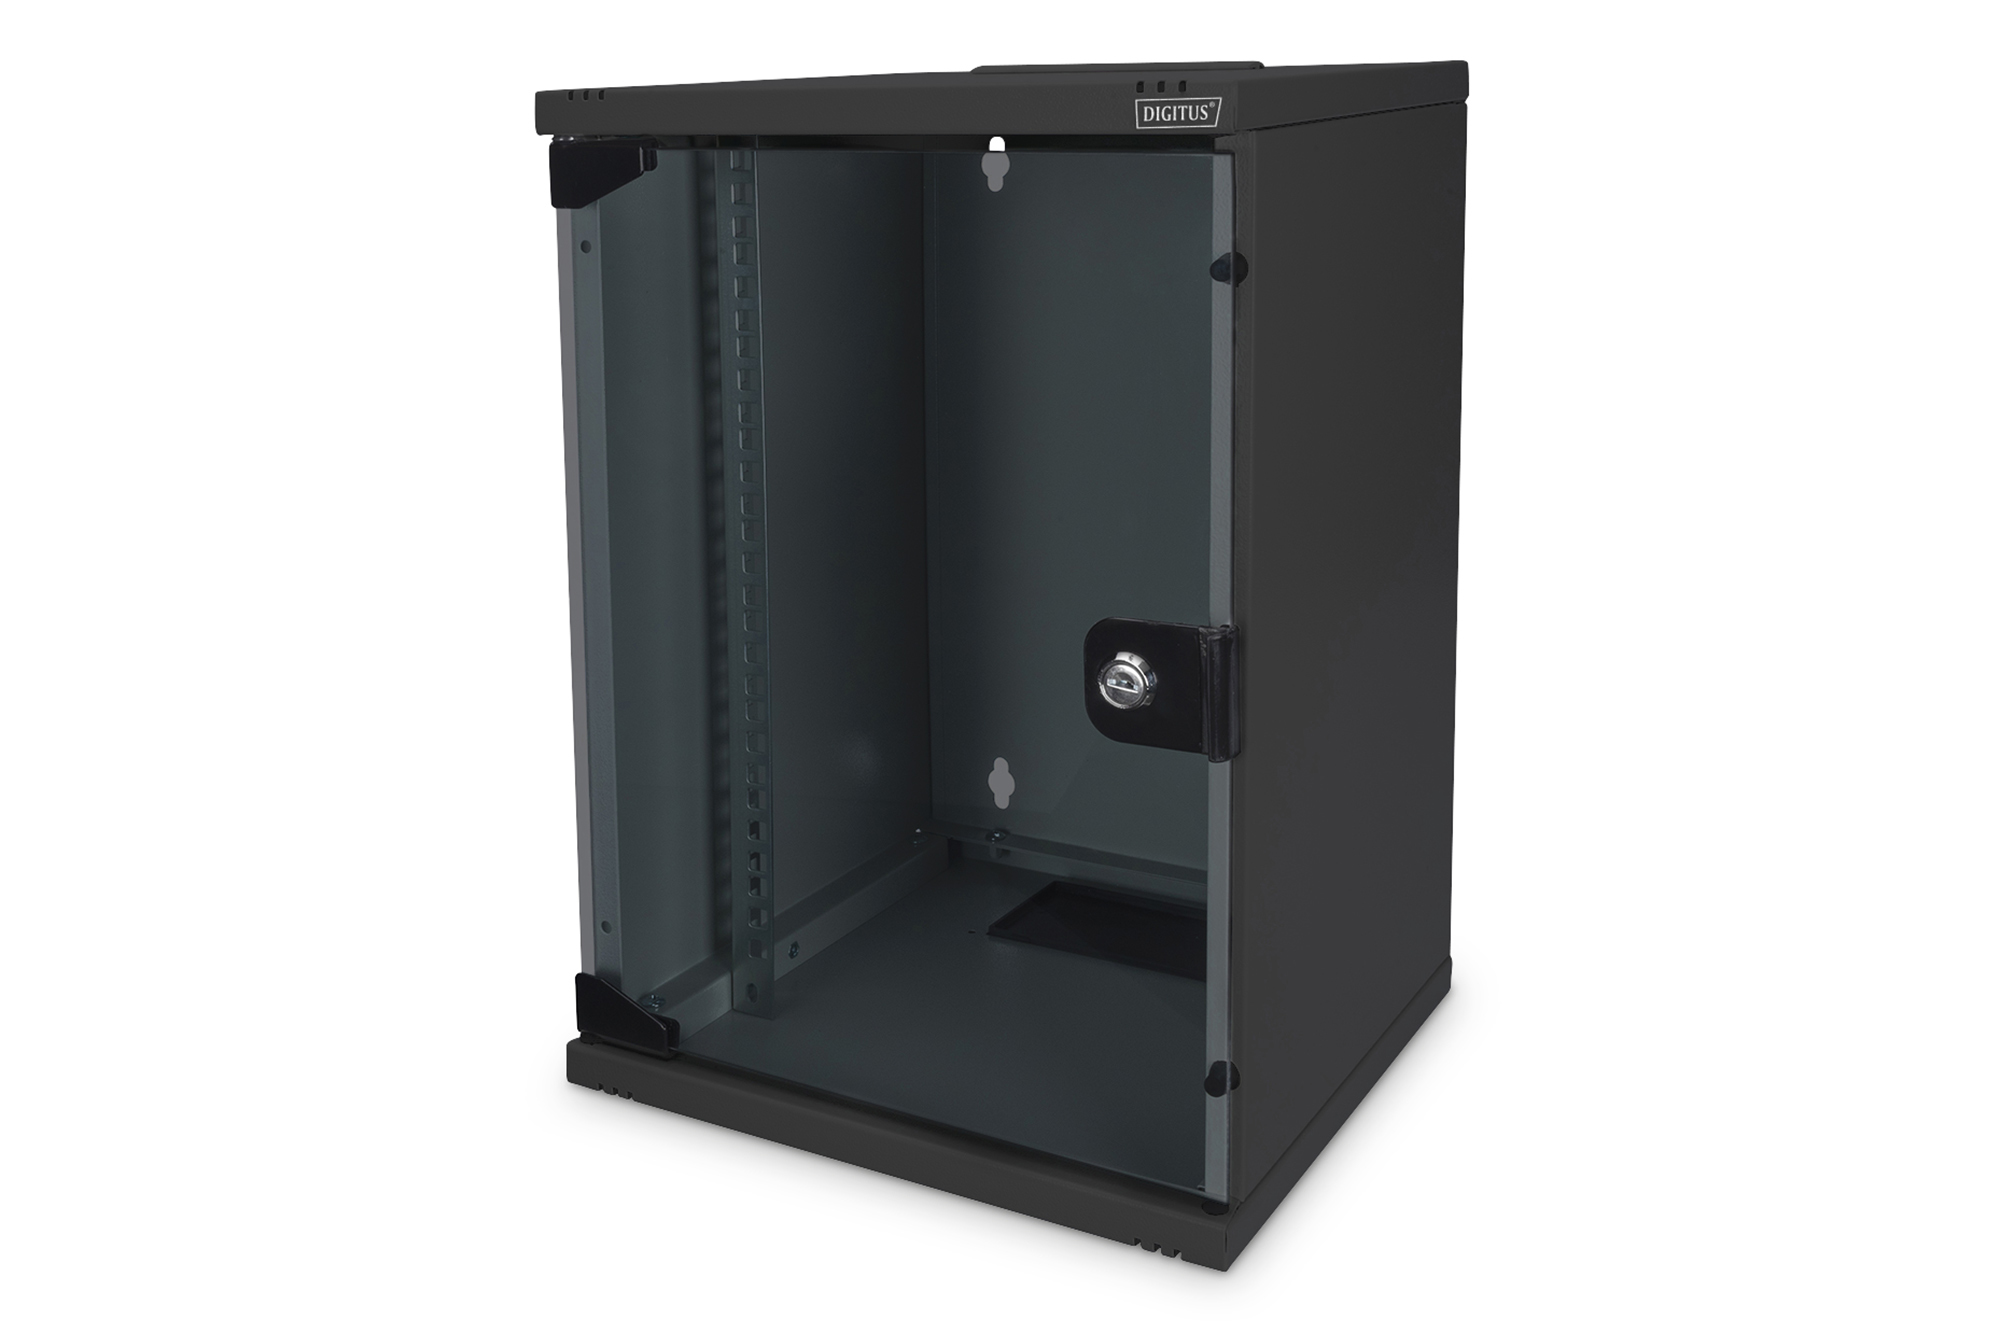 Photos - Server Component Digitus Wall Mounting Cabinet 254 mm  - 312x300 mm (WxD) DN-10-09U-B (10")